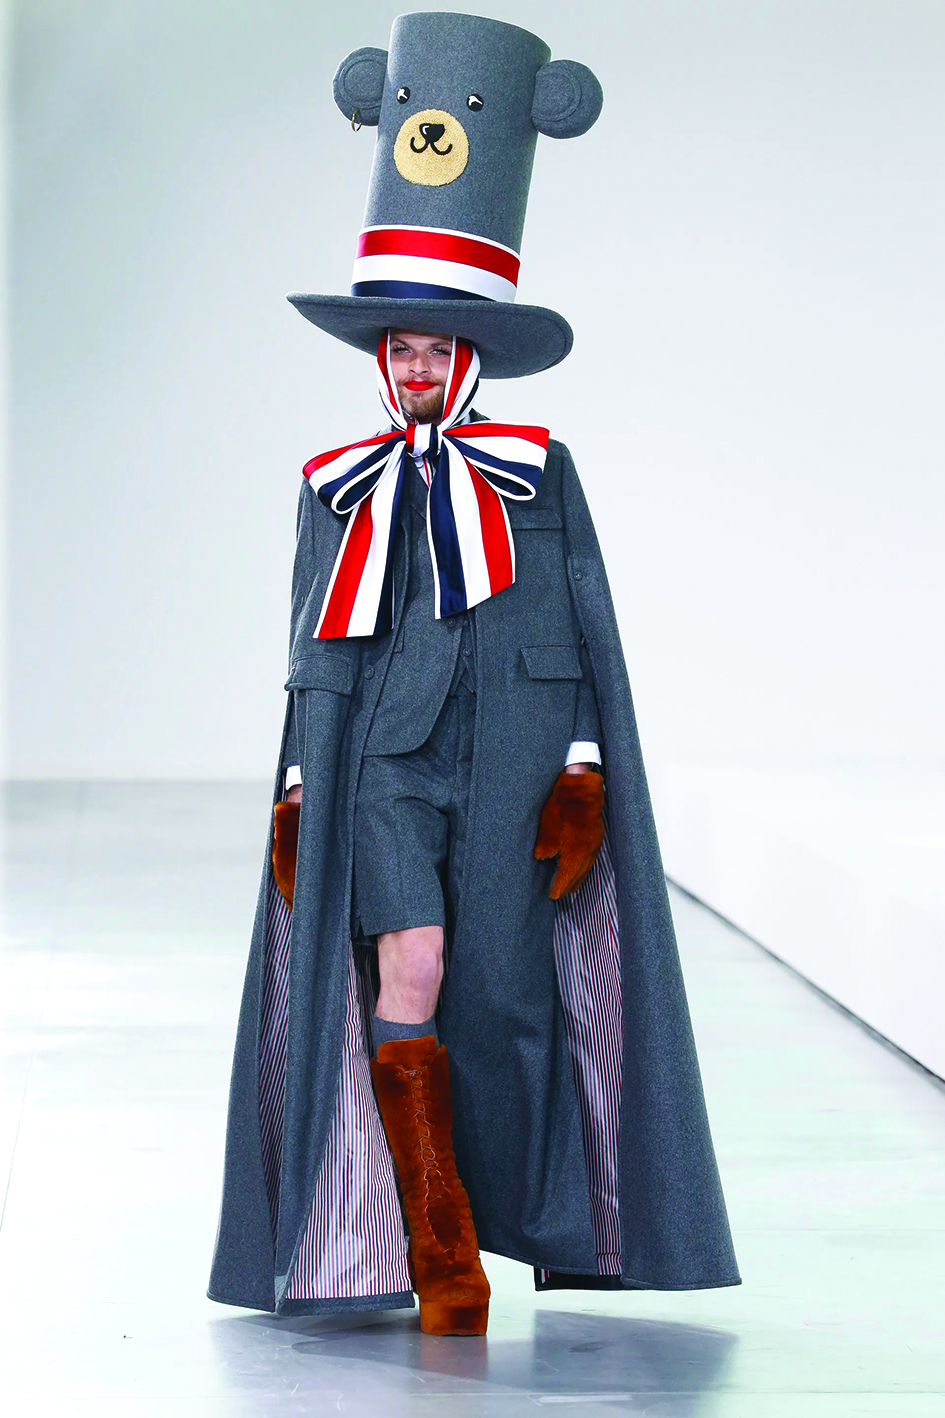 Thom Browne brings the drama to classic tailoring for Fall 2022